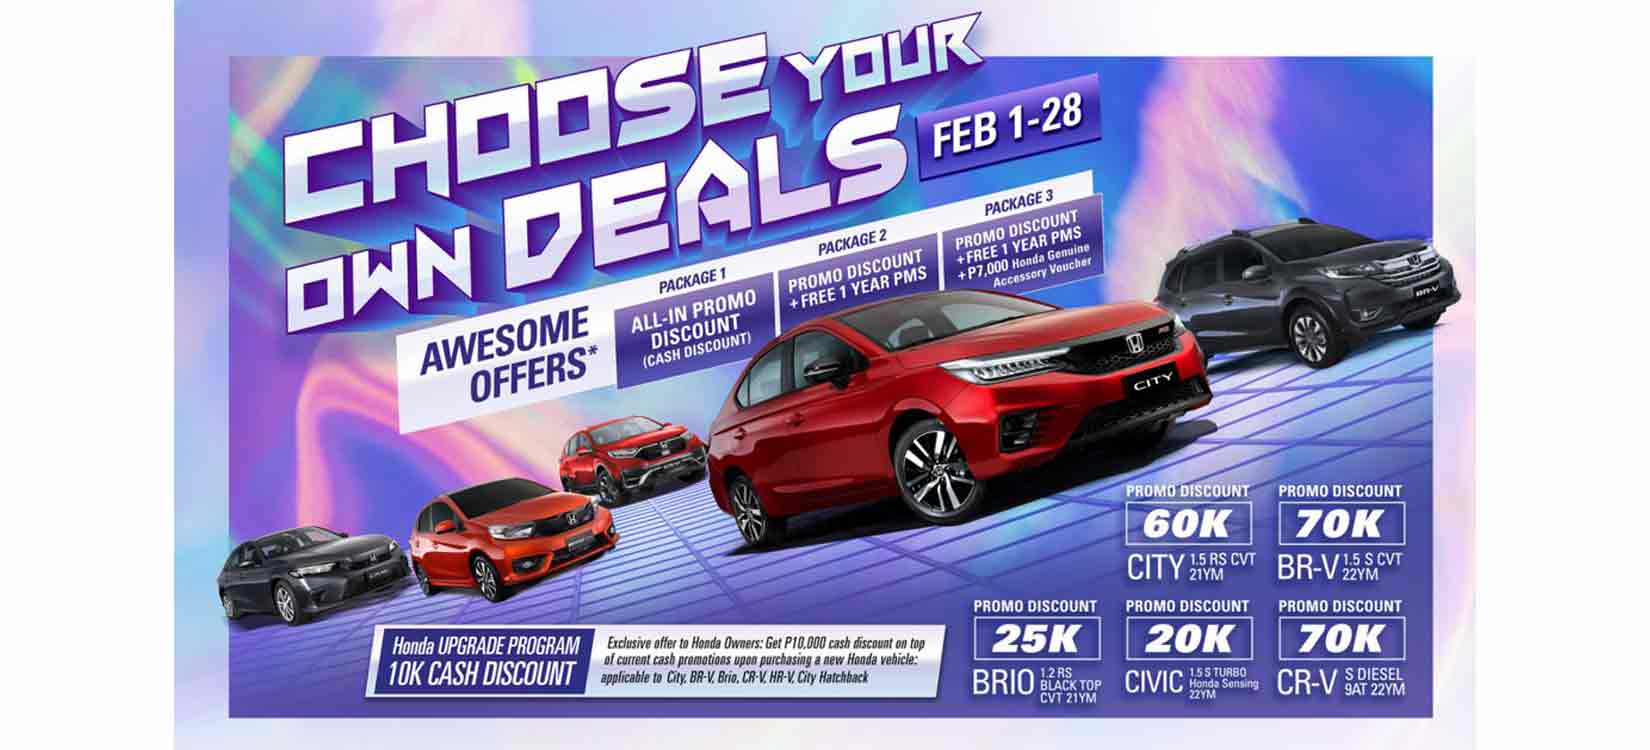 Grab Honda’s special deals on All-New Civic S Turbo Honda SENSING and BR-V; “Choose Your Own Deals” promo extended this February